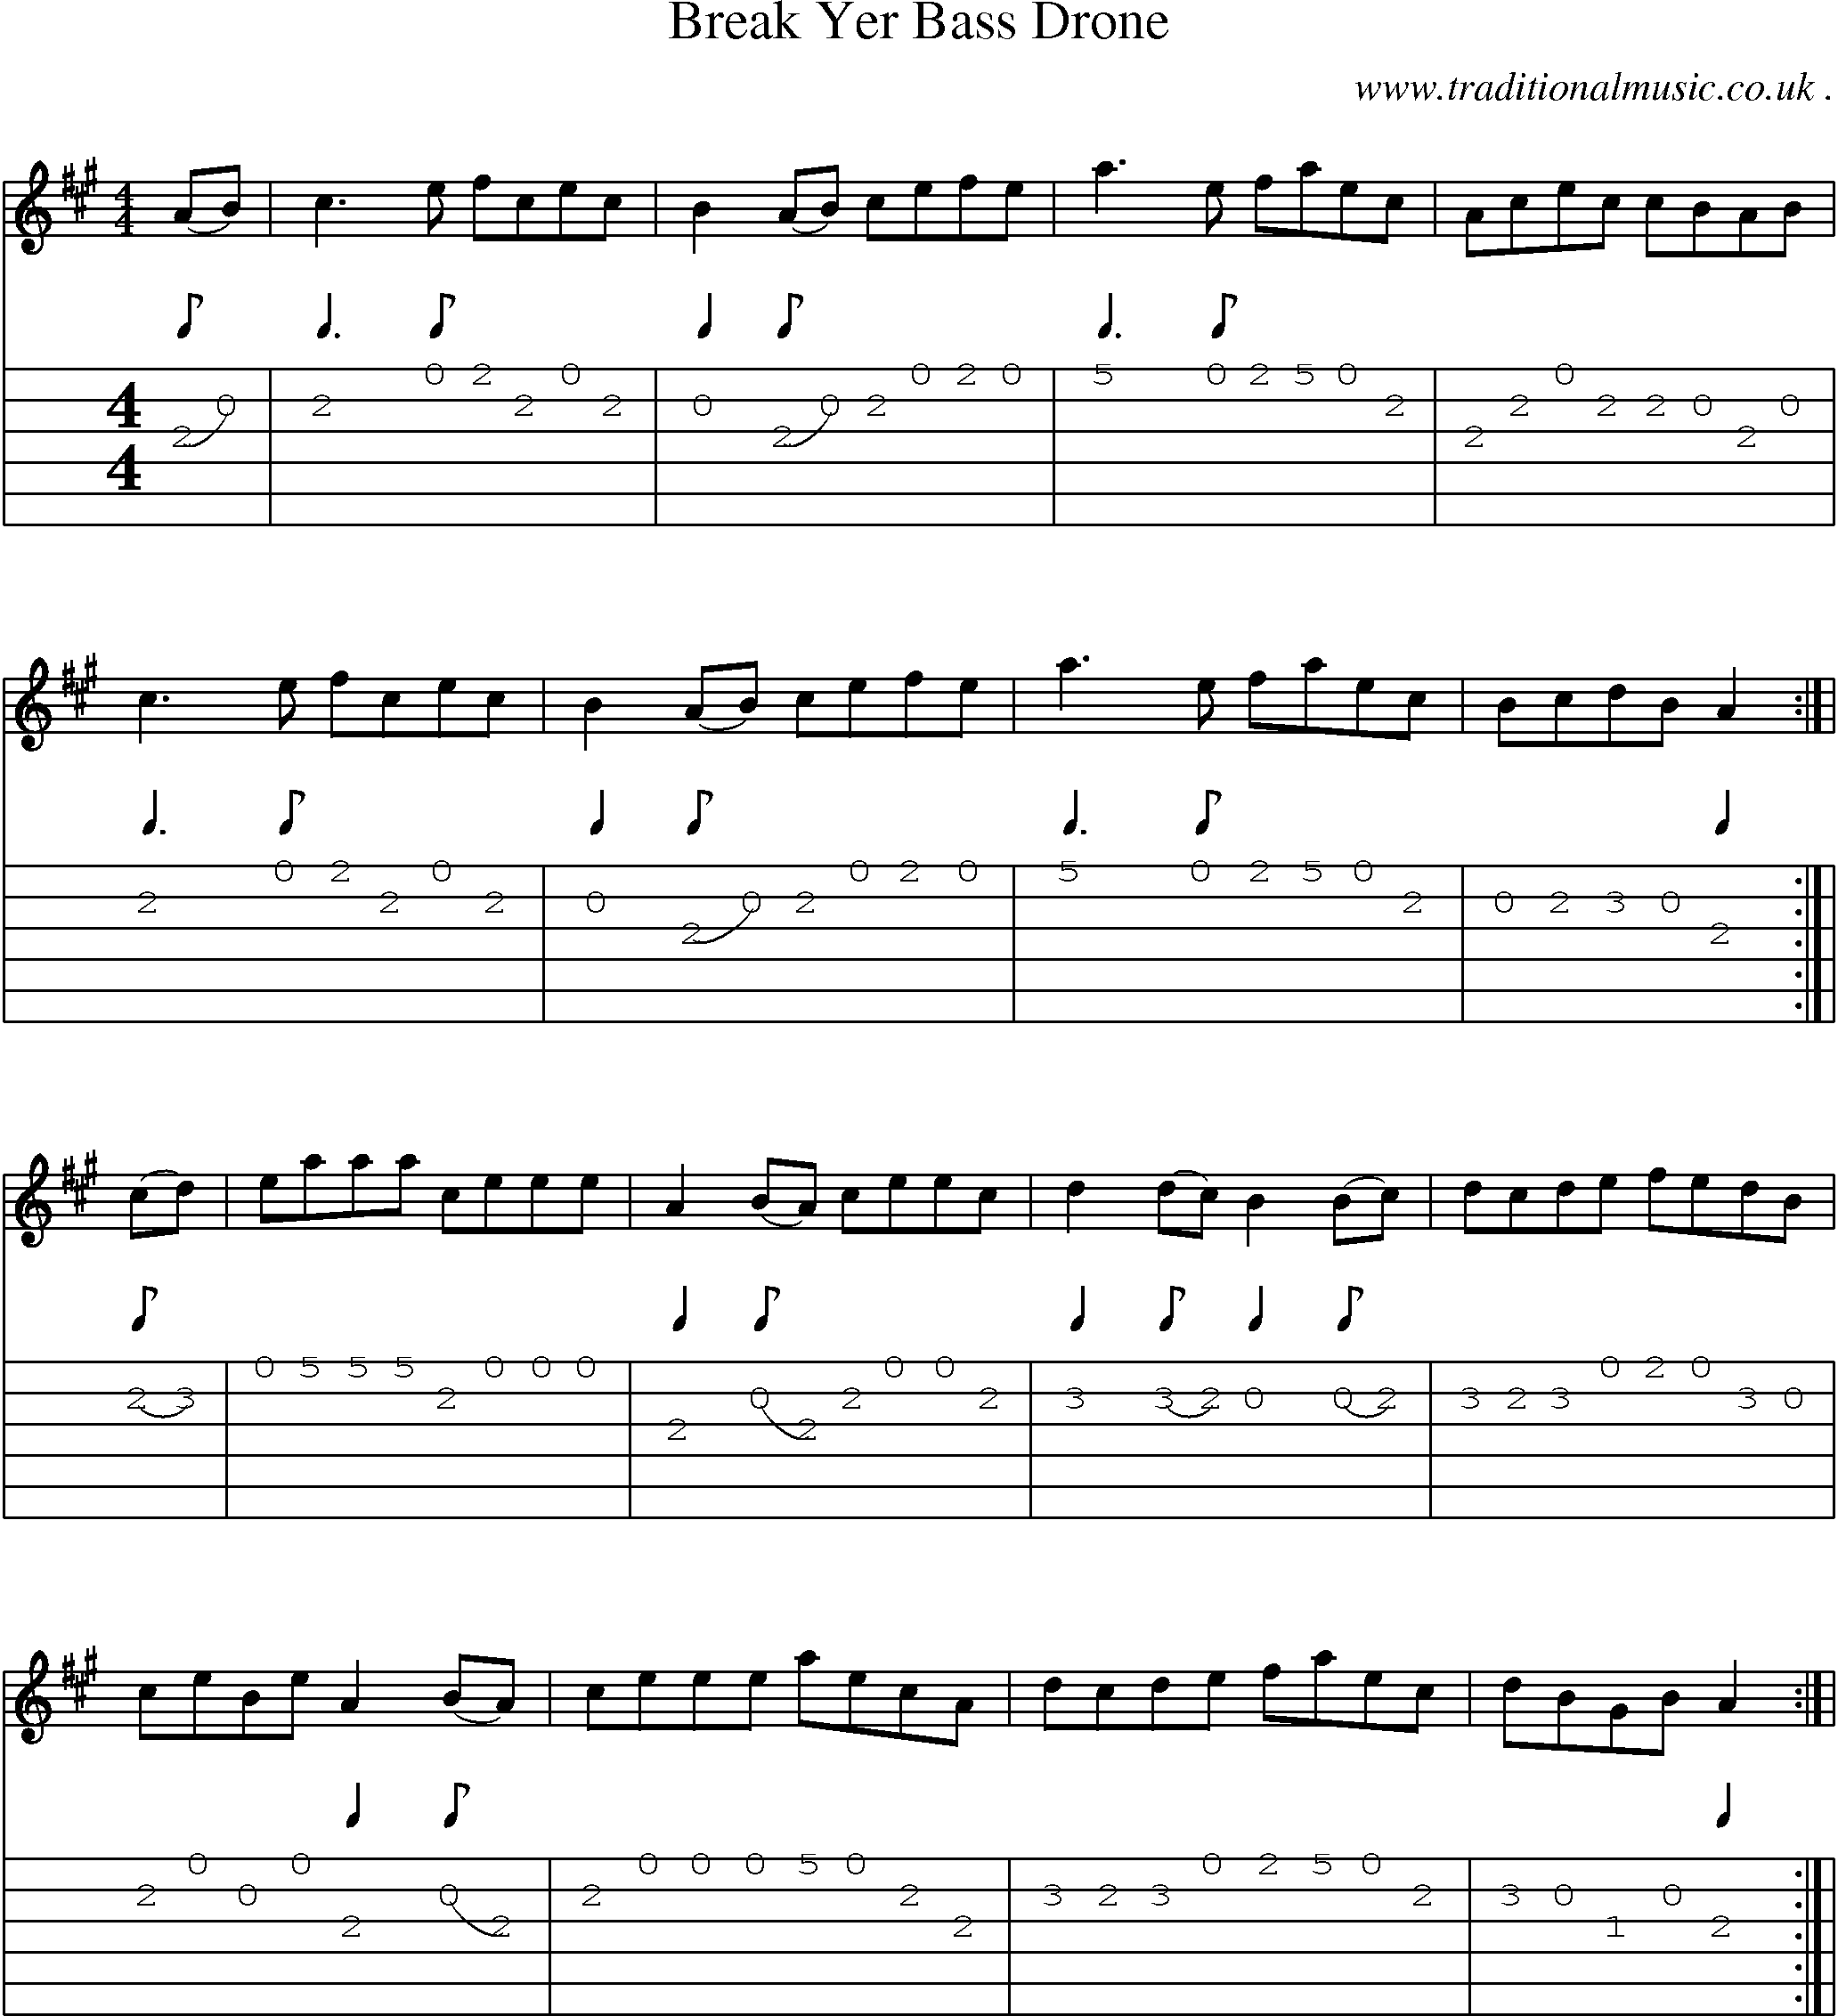 Sheet-Music and Guitar Tabs for Break Yer Bass Drone